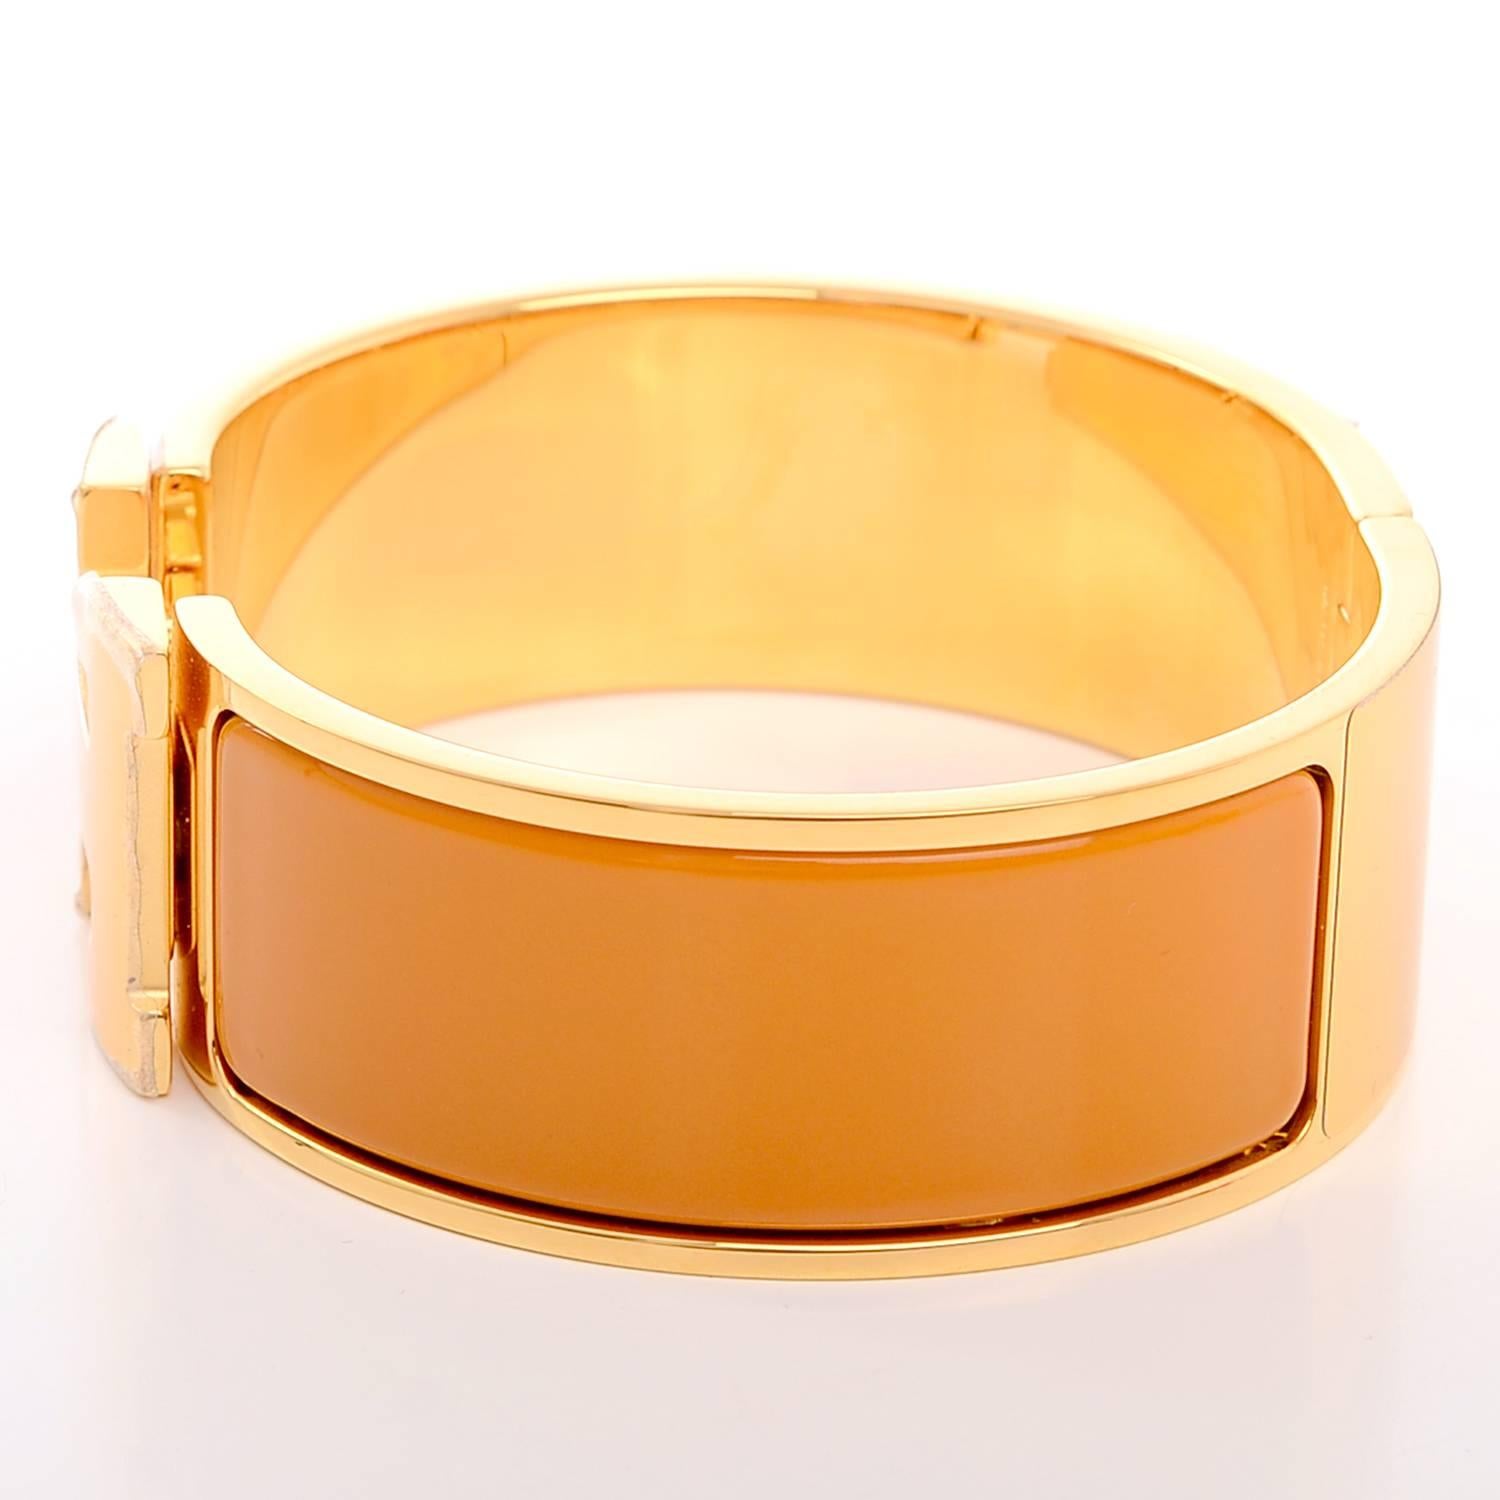 Hermes wide enamel Clic Clac H bracelet in Tumeric (burnt orange) with gold plated hardware in size PM.

Origin: France

Condition: Pristine, store fresh condition

Accompanied by: Hermes box and dust bag, carebook, ribbon

Measurements: